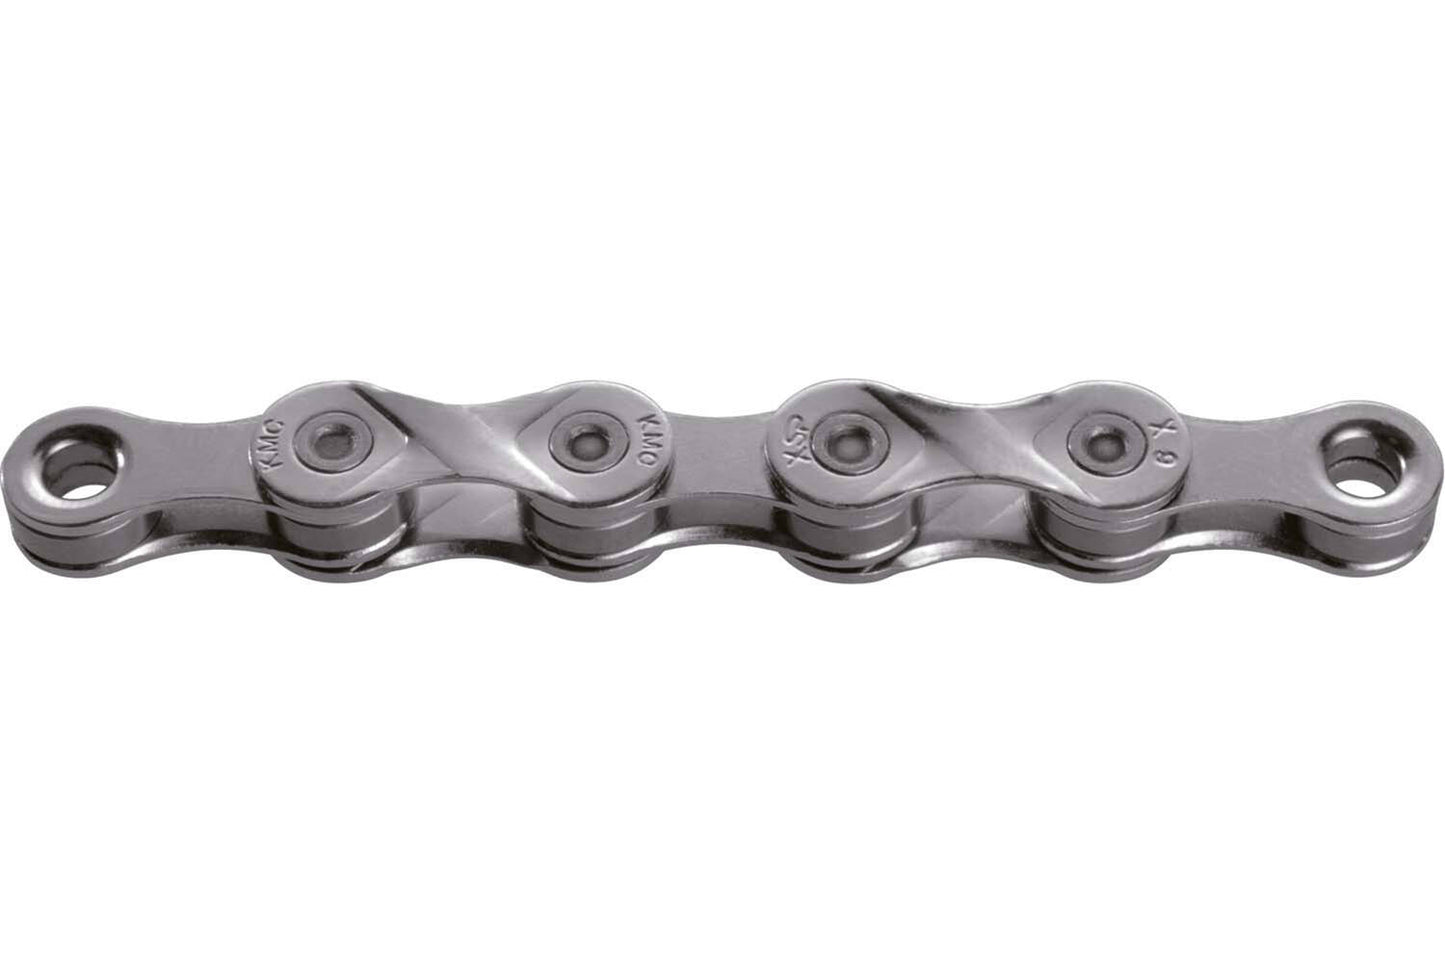 KMC X9 EPT Bicycle Chain 114 Schakels, 288G, argento